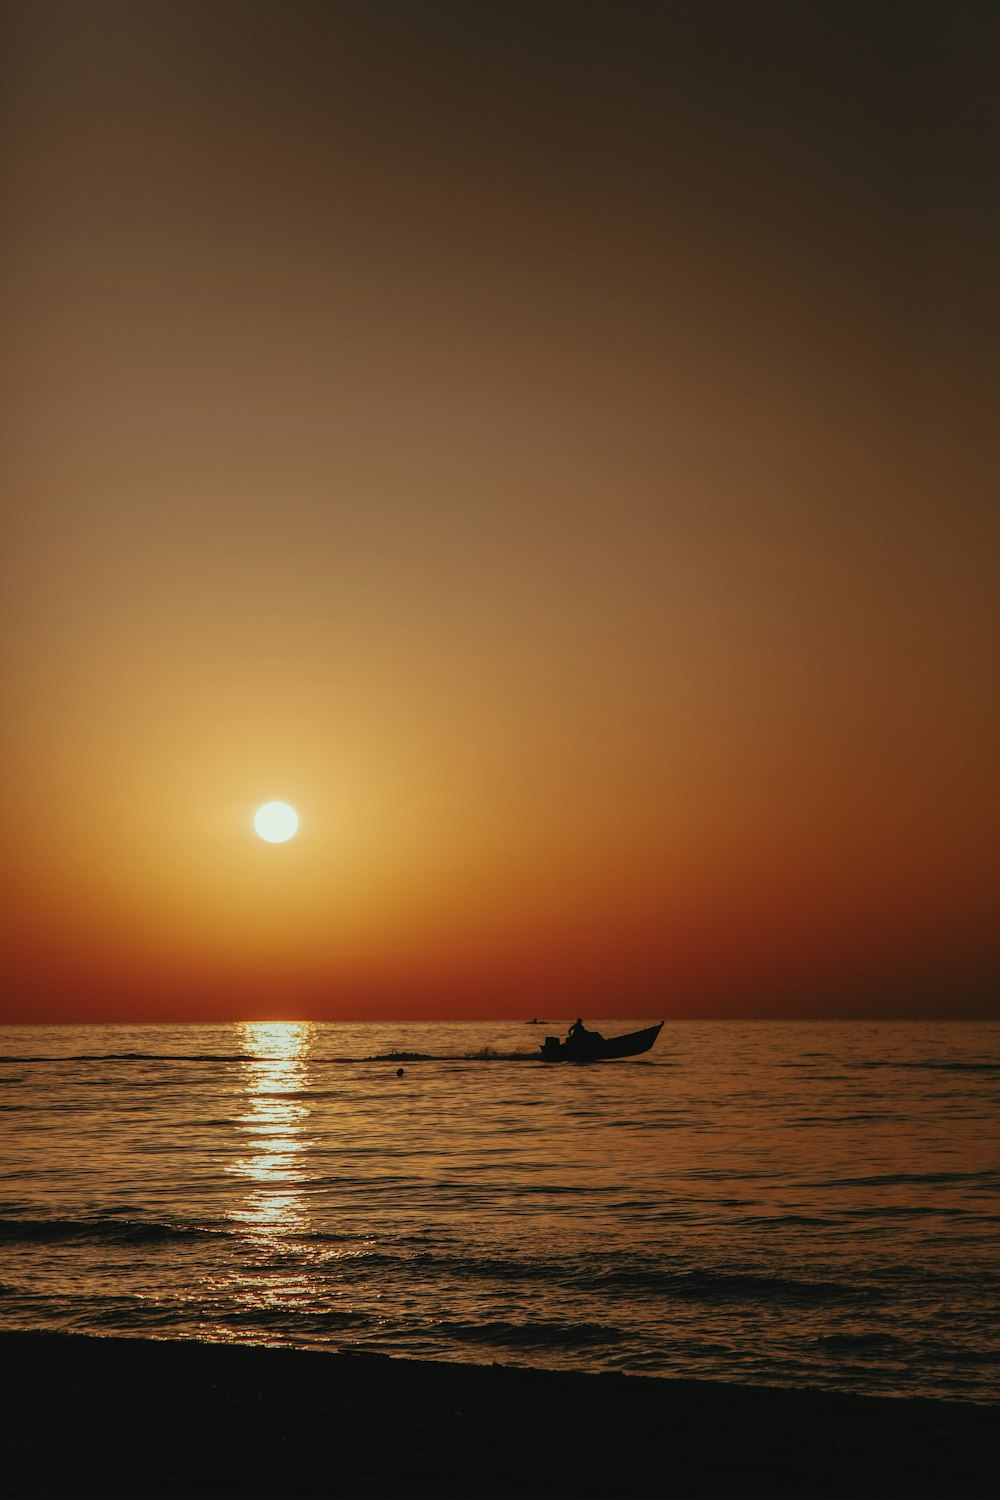 silhouette of person riding on boat during sunset